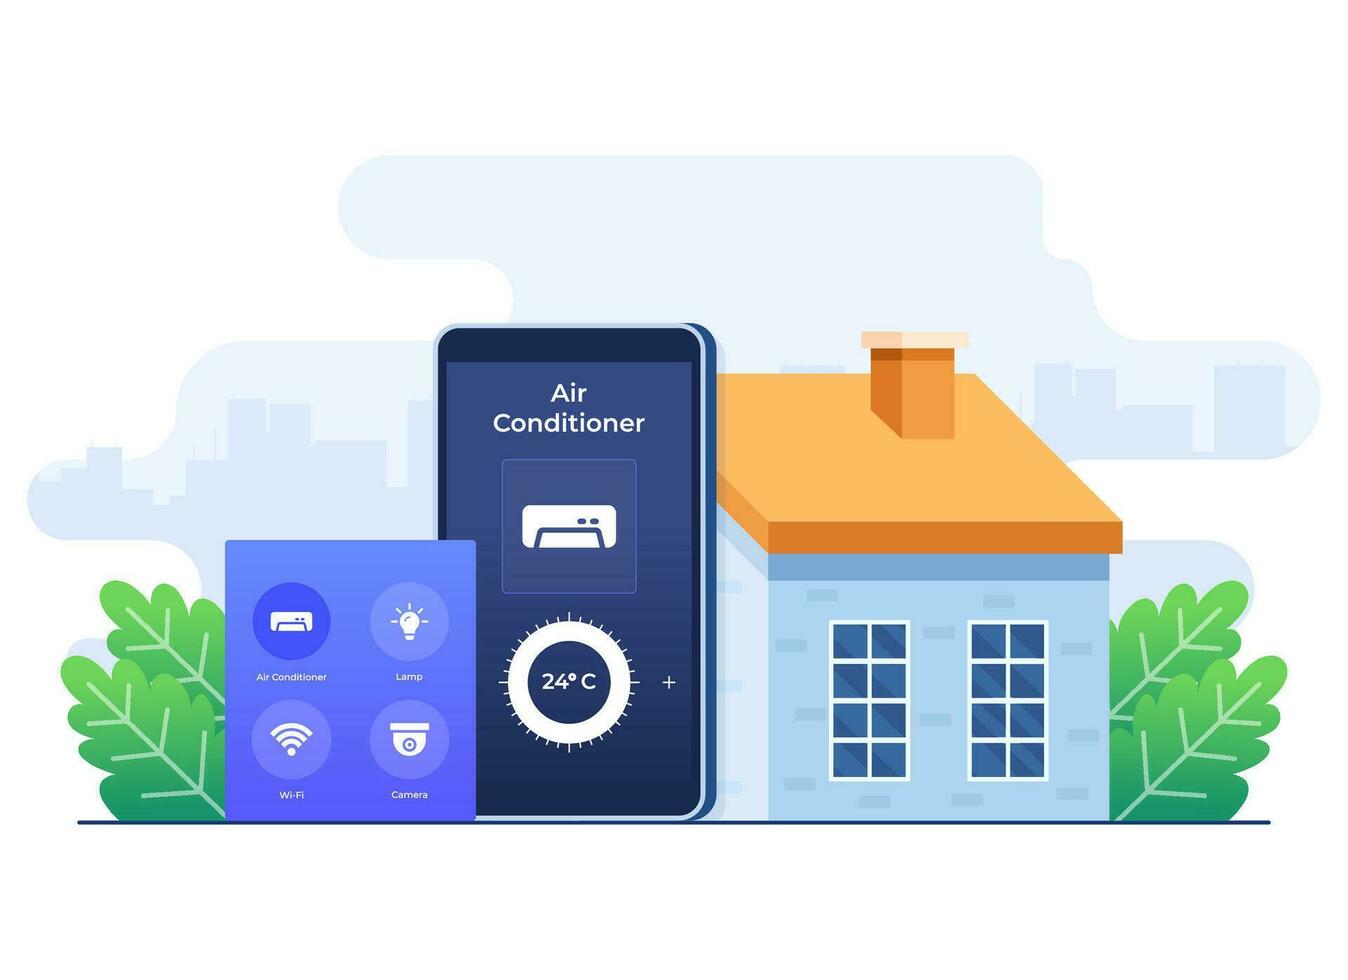 Smart home application concept, Home automation, Controlling air conditioner using a smartphone, Remote home control technology, house technology system with wireless centralized control vector